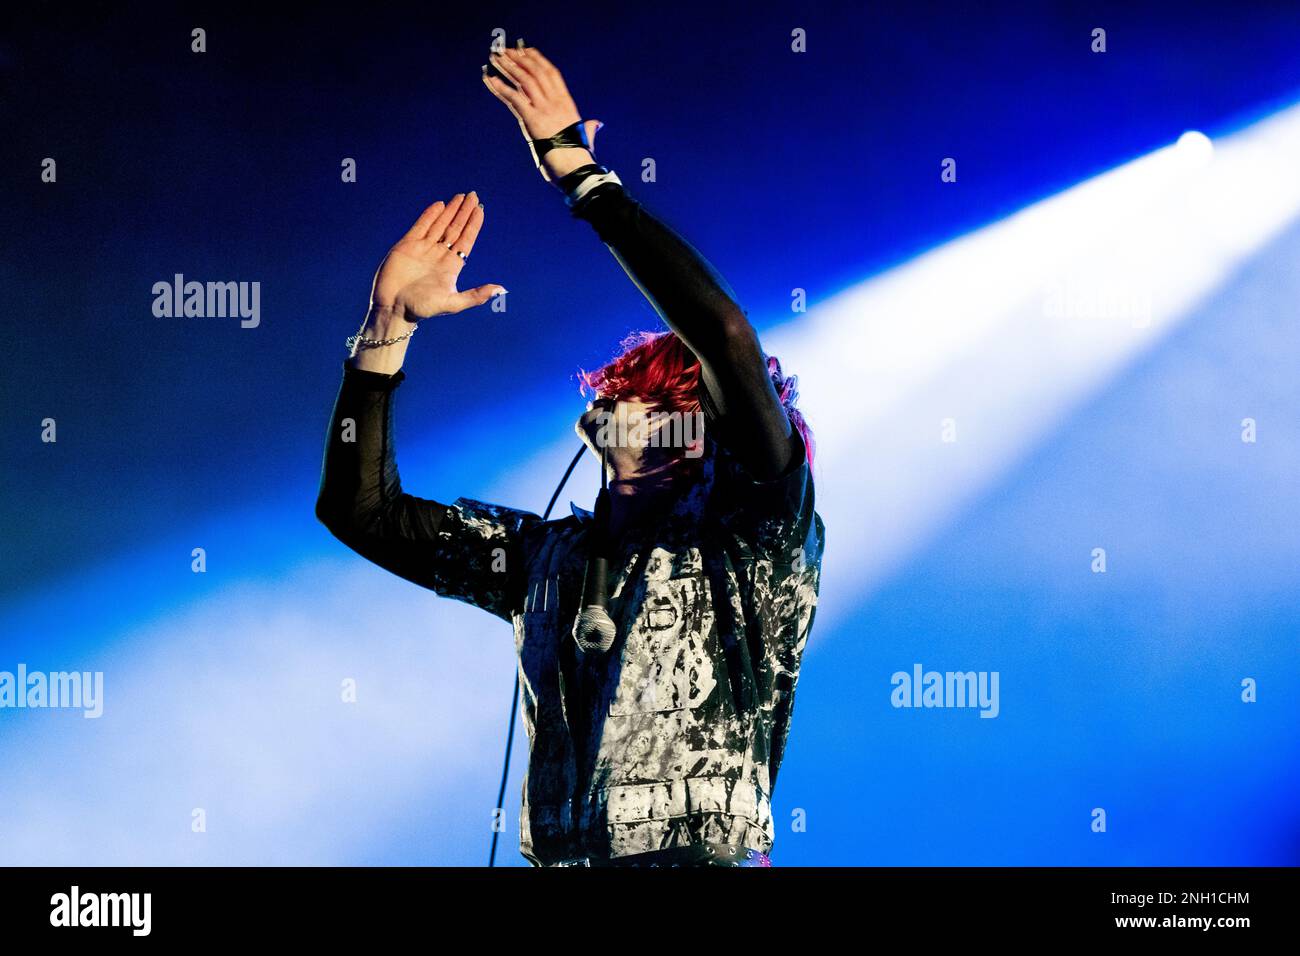 Milan 11 February 2023 Static Dress - opening act for bting me the horizon - live at Forum Assago Italy © Andrea Ripamonti / Alamy Stock Photo